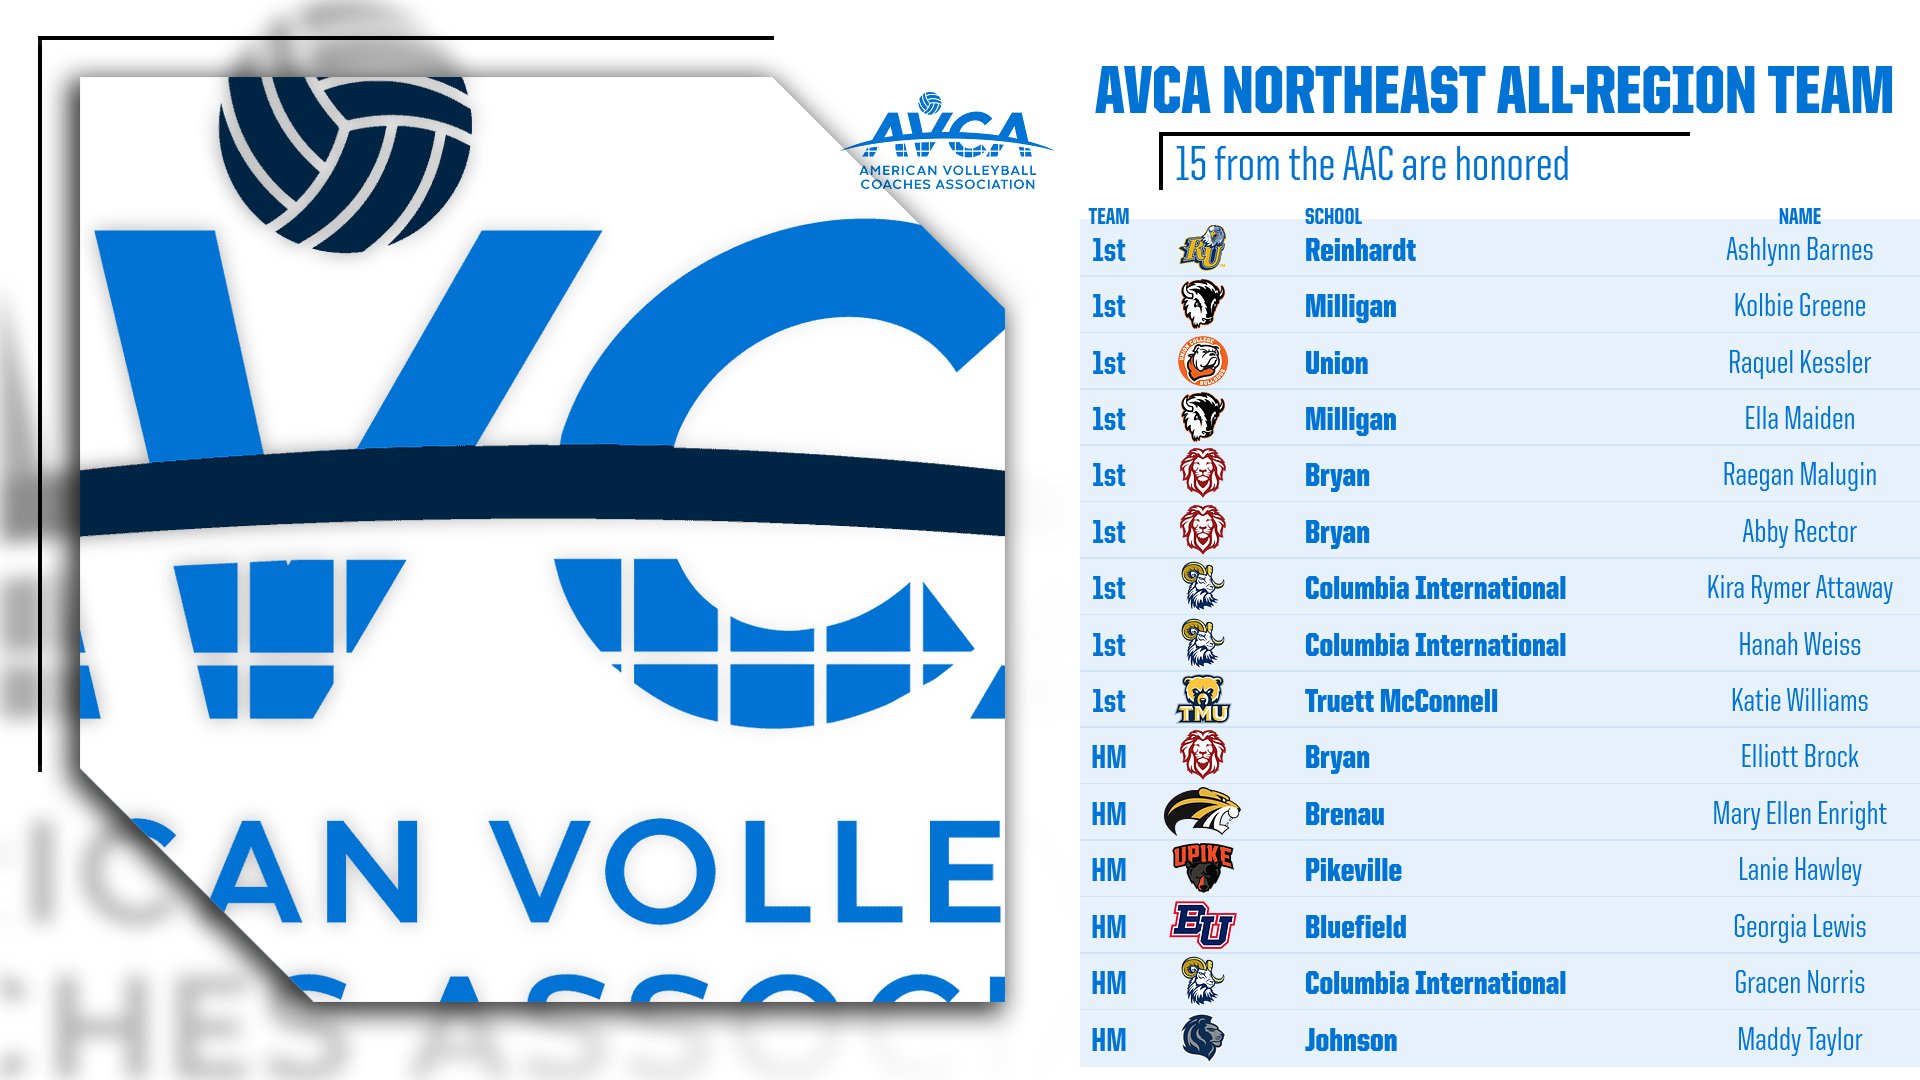 AAC Land 15 on AVCA All-Region Team; Attaway, Norris Collect Individual Honors